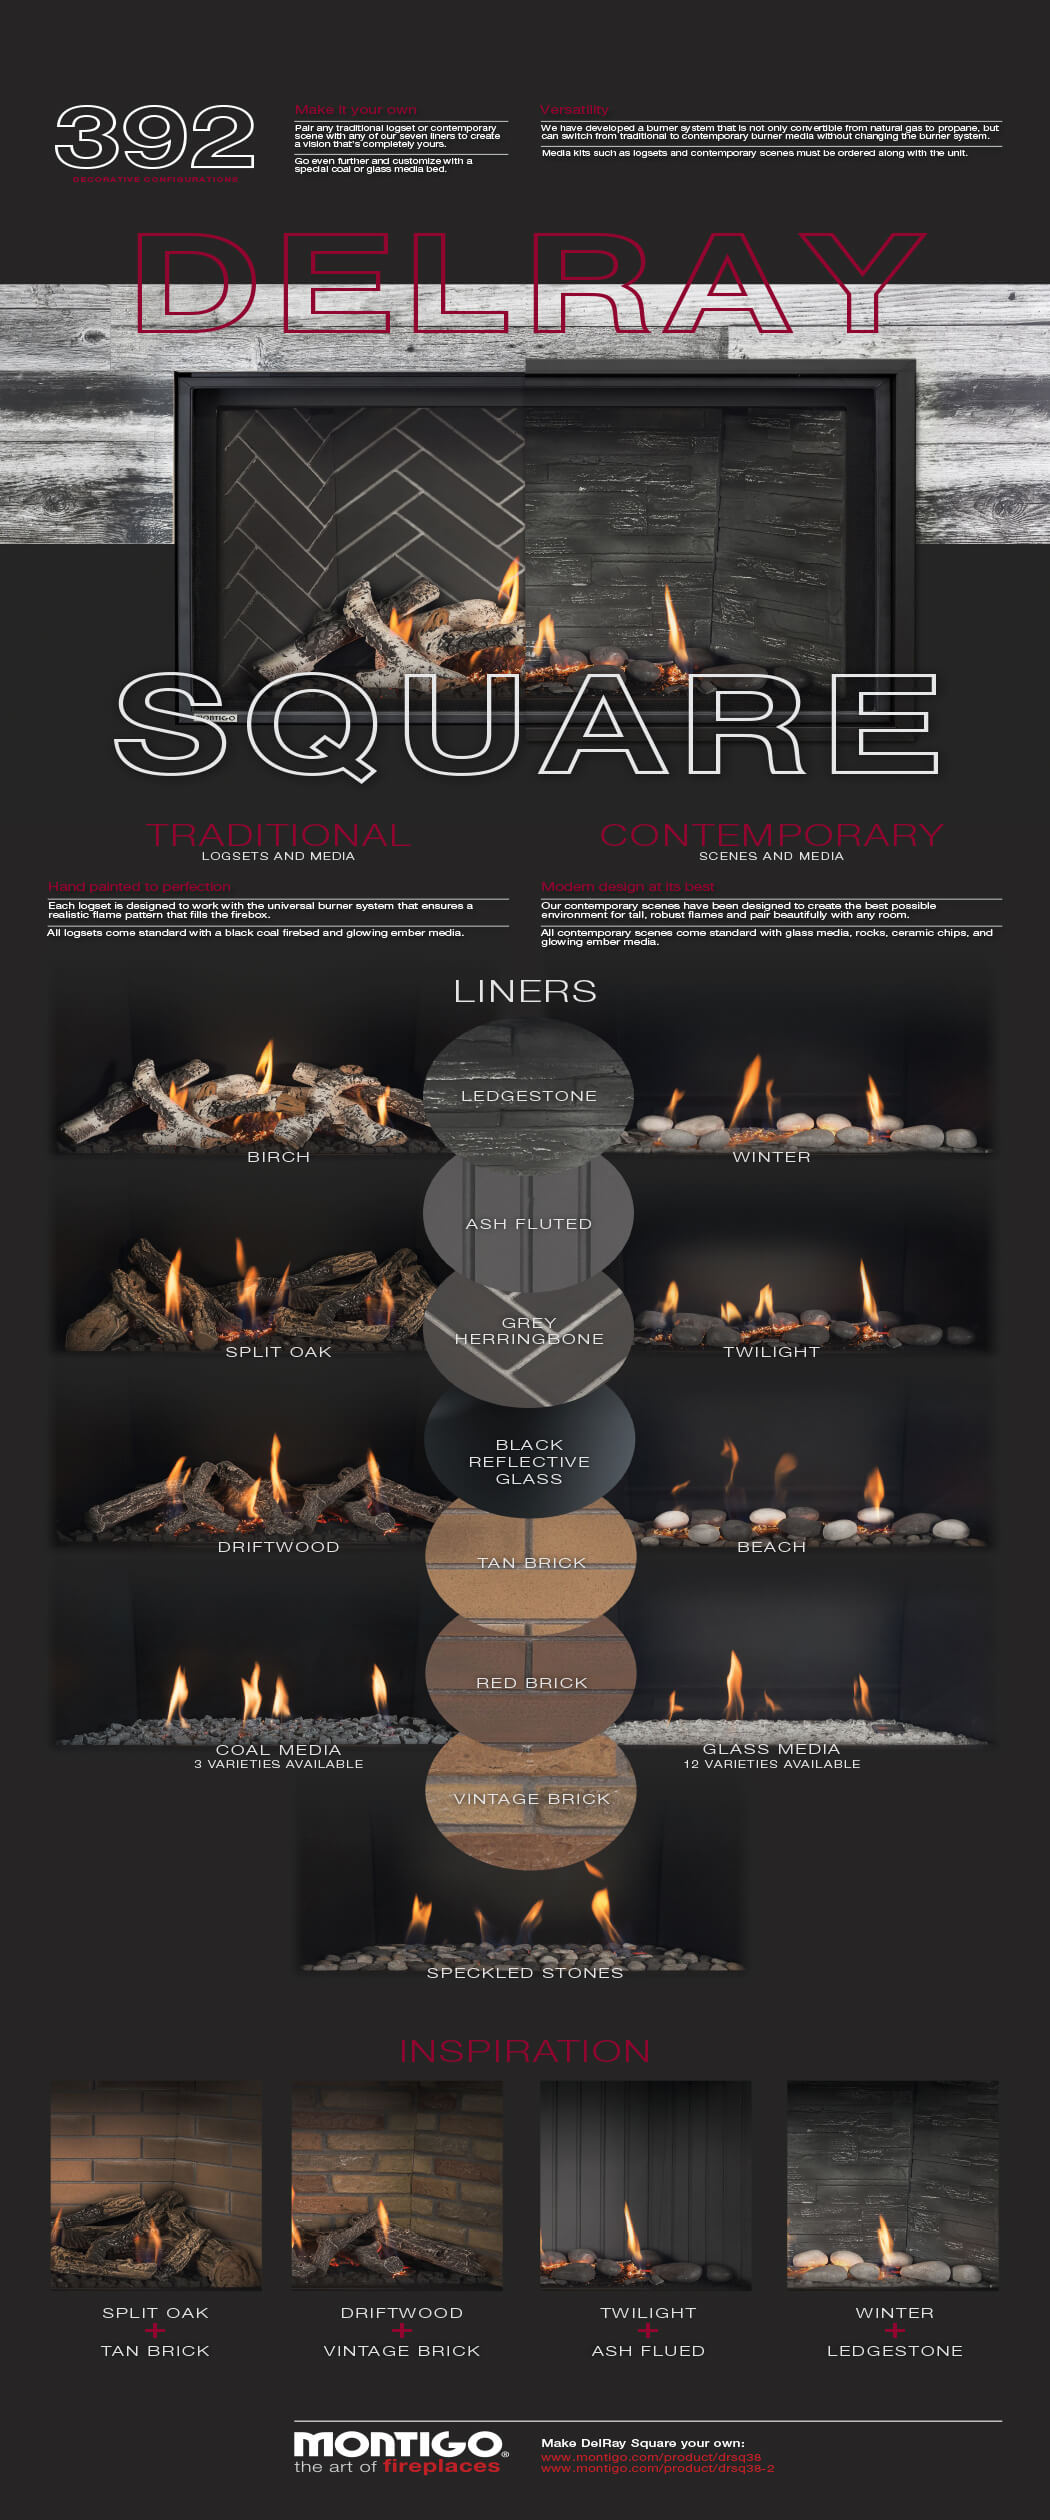 Montigo DelRay Square media infographic showing all available liners and media options